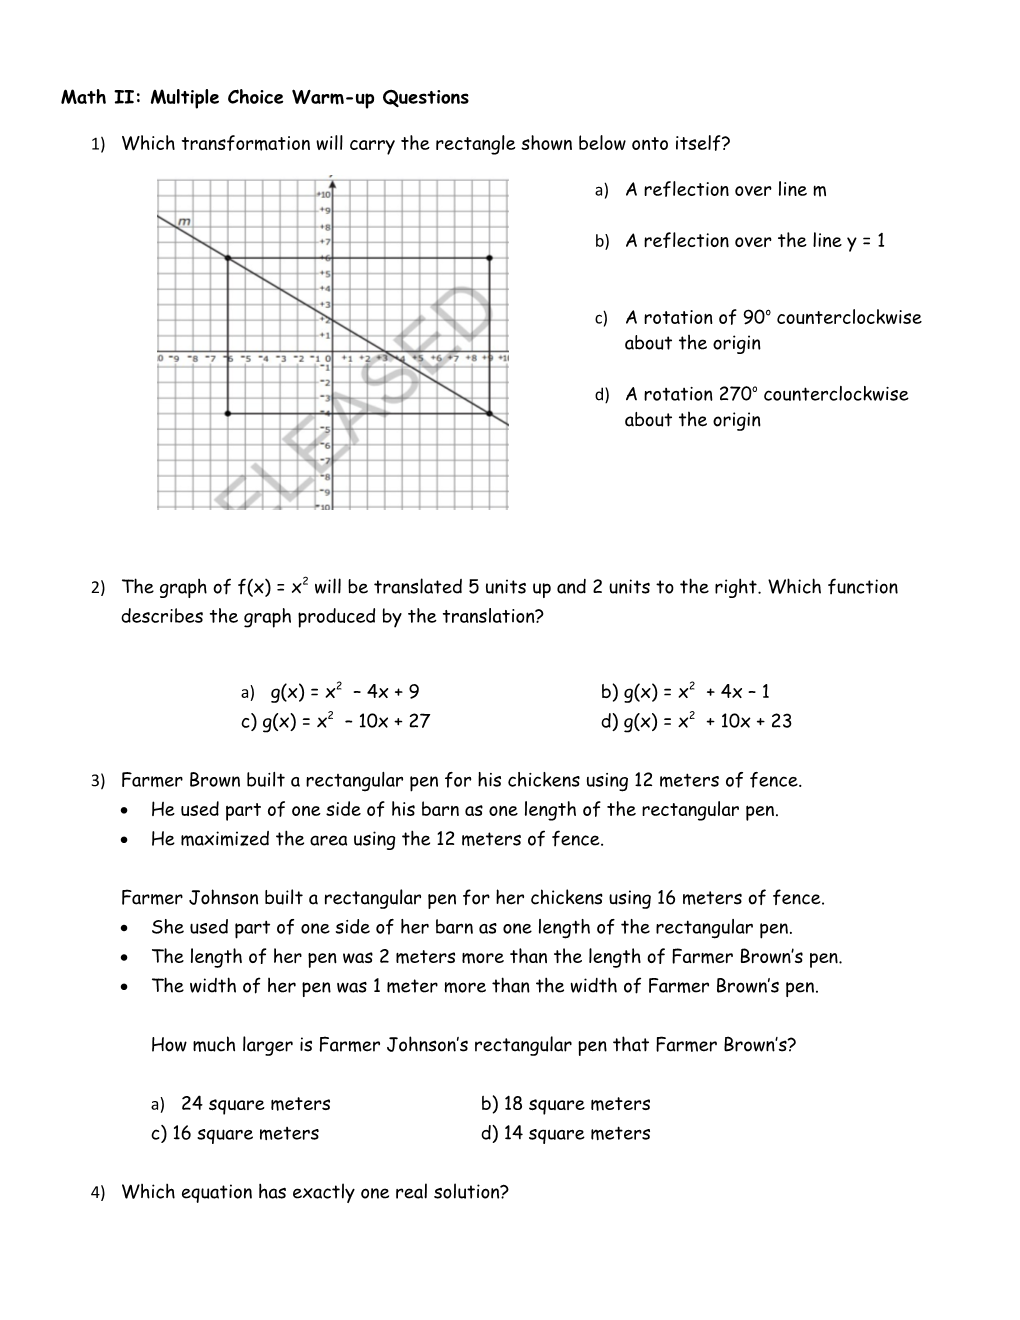 Math II: Multiple Choice Warm-Up Questions